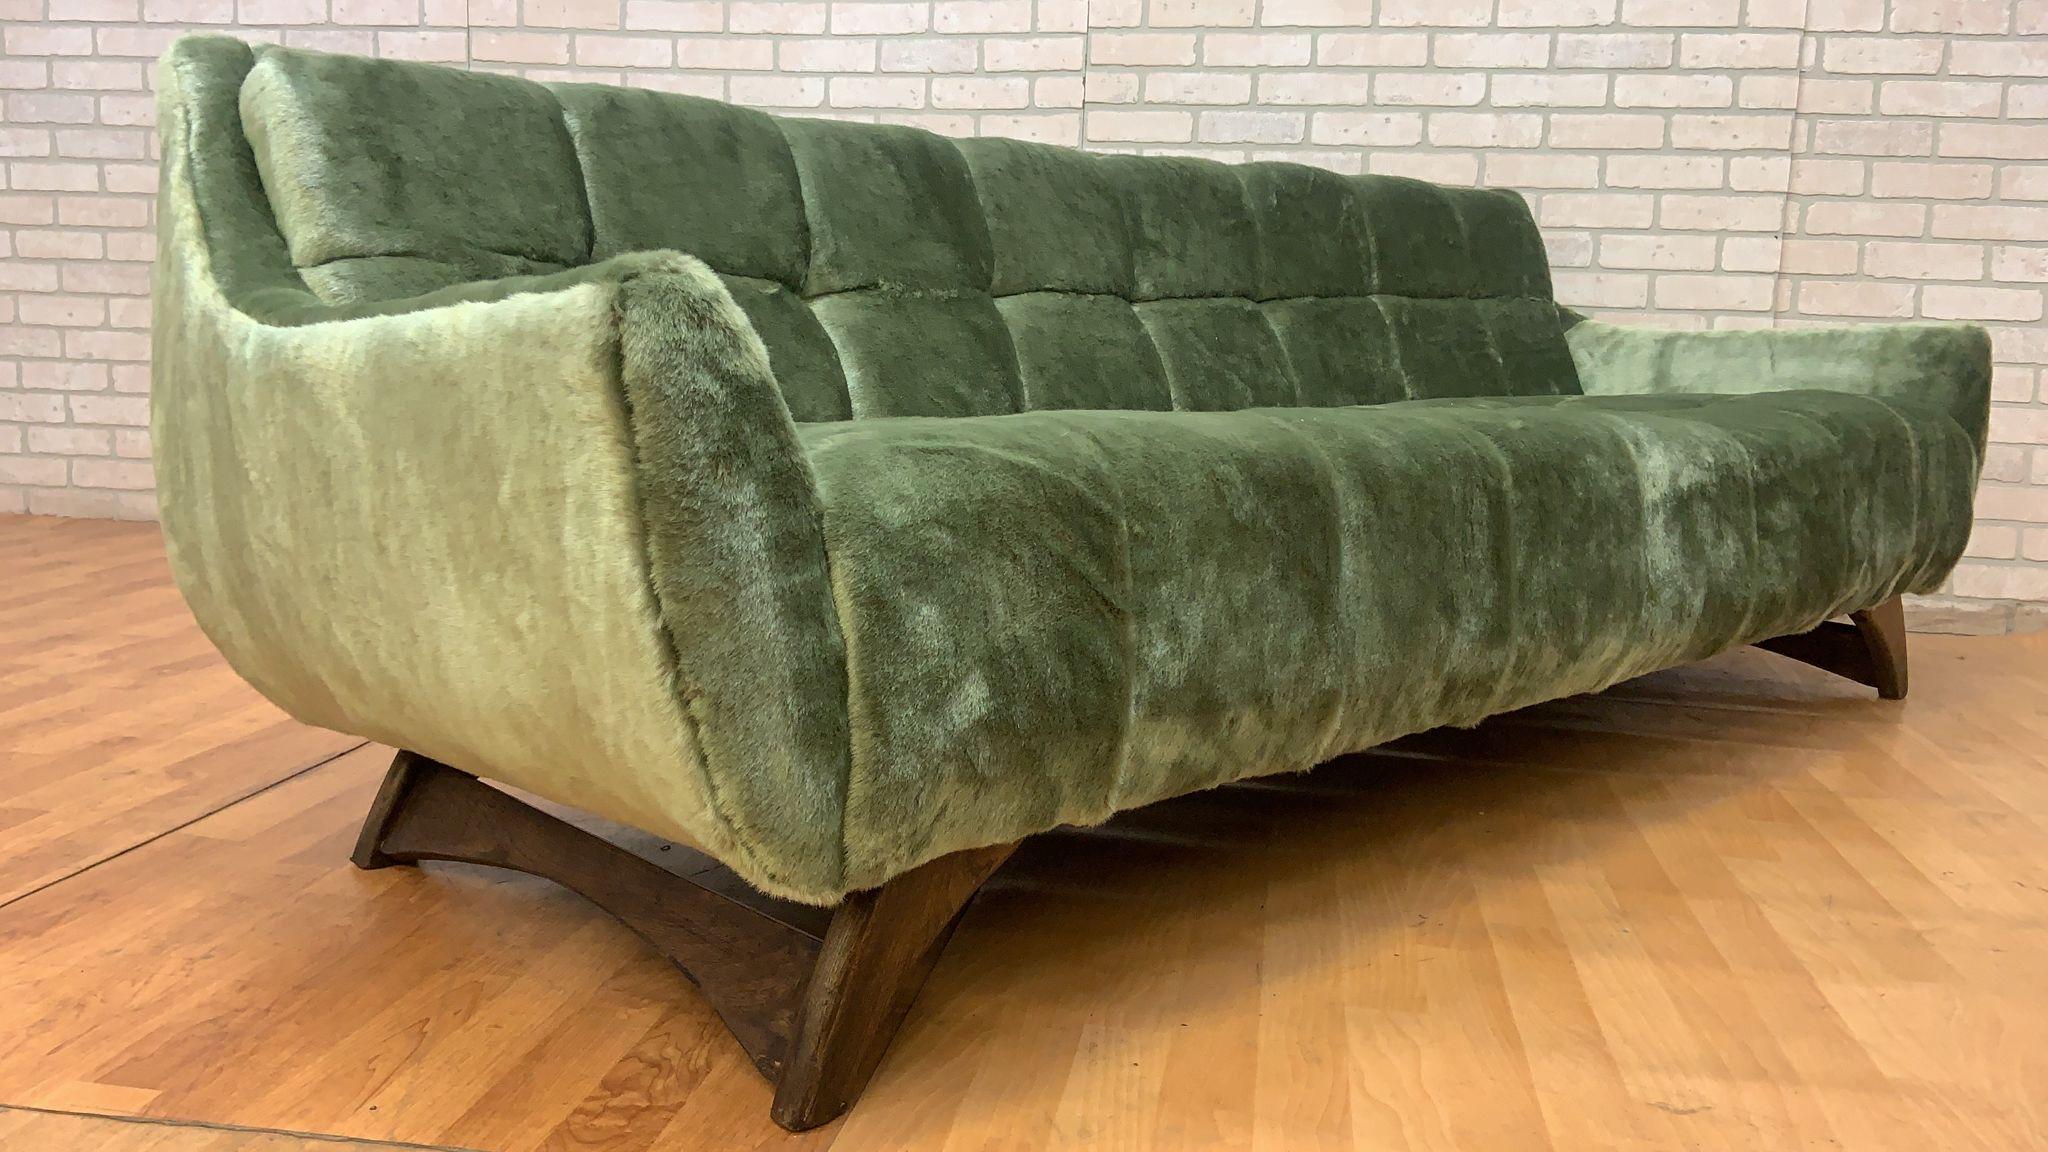 Mid Century Modern Adrian Pearsall Style Cube Button Tufted Gondola Sofa Newly Upholstered in Tufted Plush Sage Green Shag

Circa: 1960’s

Dimensions:
H: 28.5” 
W: 90”
D: 36”

Seat H: 17”
Seat D: 23”
Arm H: 19”

The Mid Century Modern Adrian